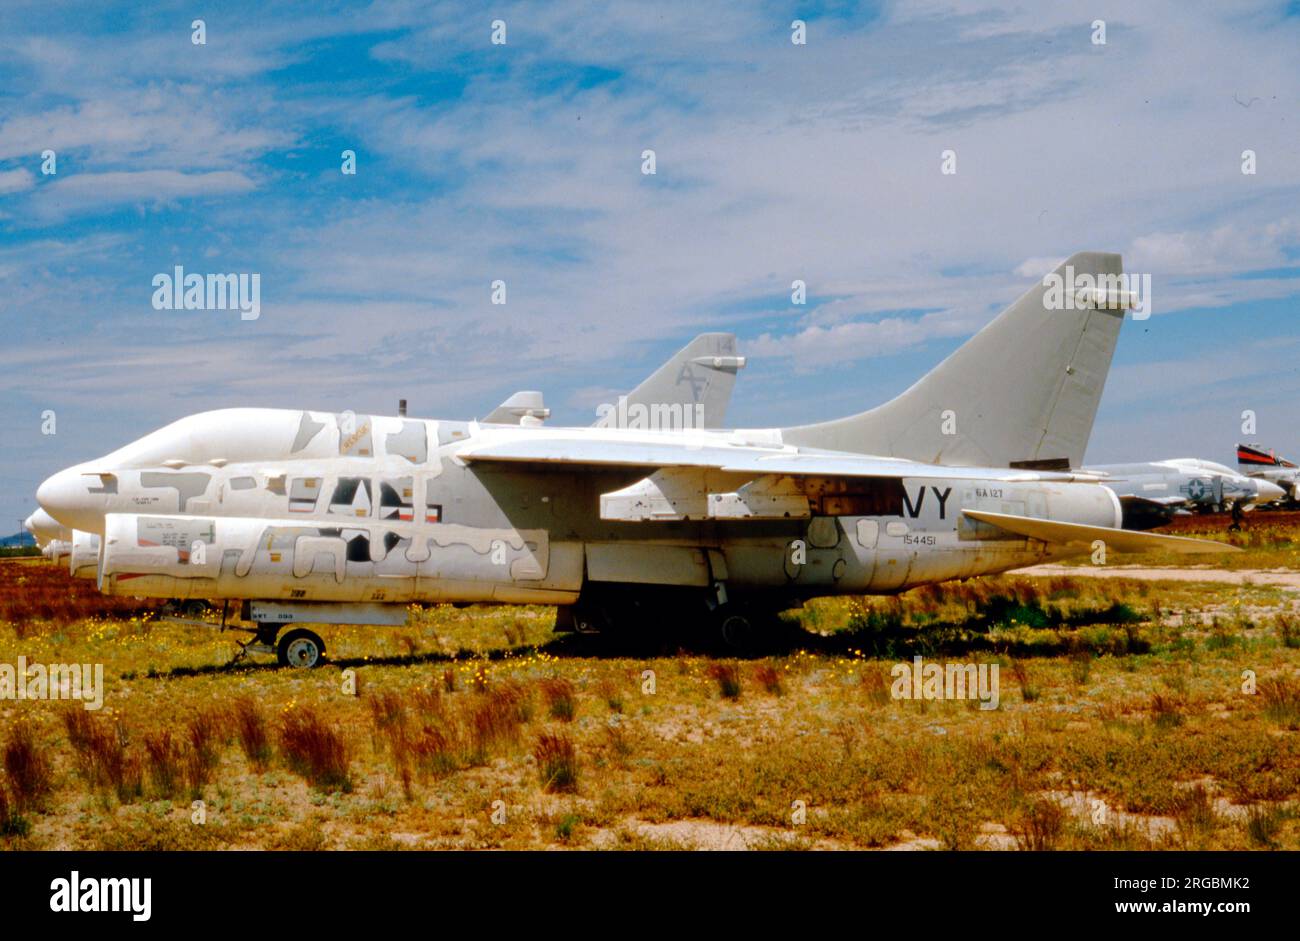 United States Navy (USN) - Ling-Temco-Vought A-7B-2-CV Corsair II 154451 (MSN B-91), at Davis-Monthan Air Force Base for storage and disposal. Stock Photo